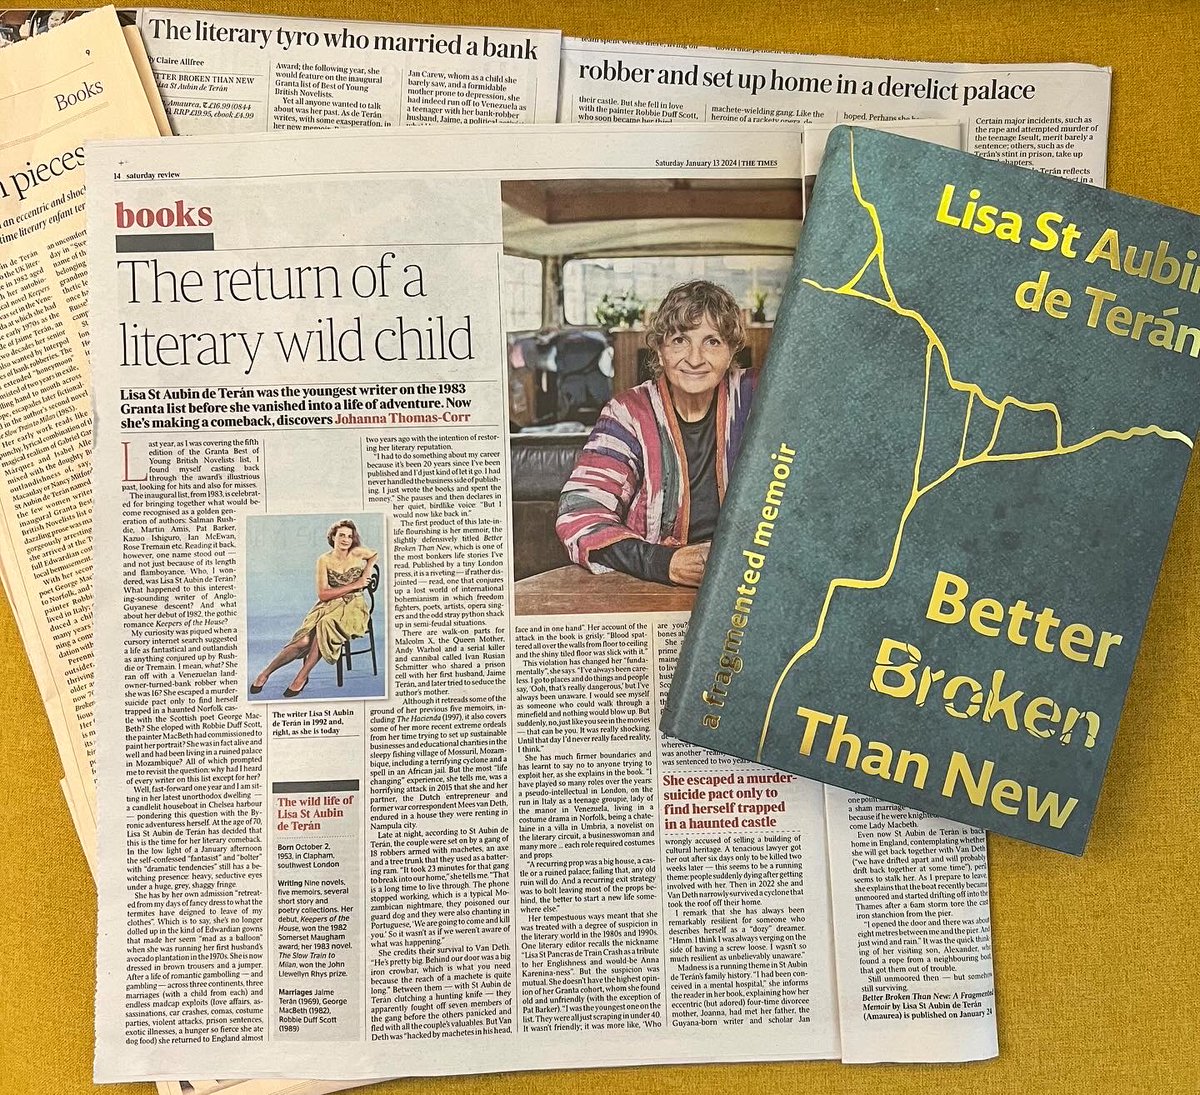 Happy publication to Lisa St Aubin de Terán, who has returned to the literary limelight after almost 20 years with a timeless new memoir ‘Better Broken Than New’, filling in many of the dramatic & scandalous gaps in her remarkable life